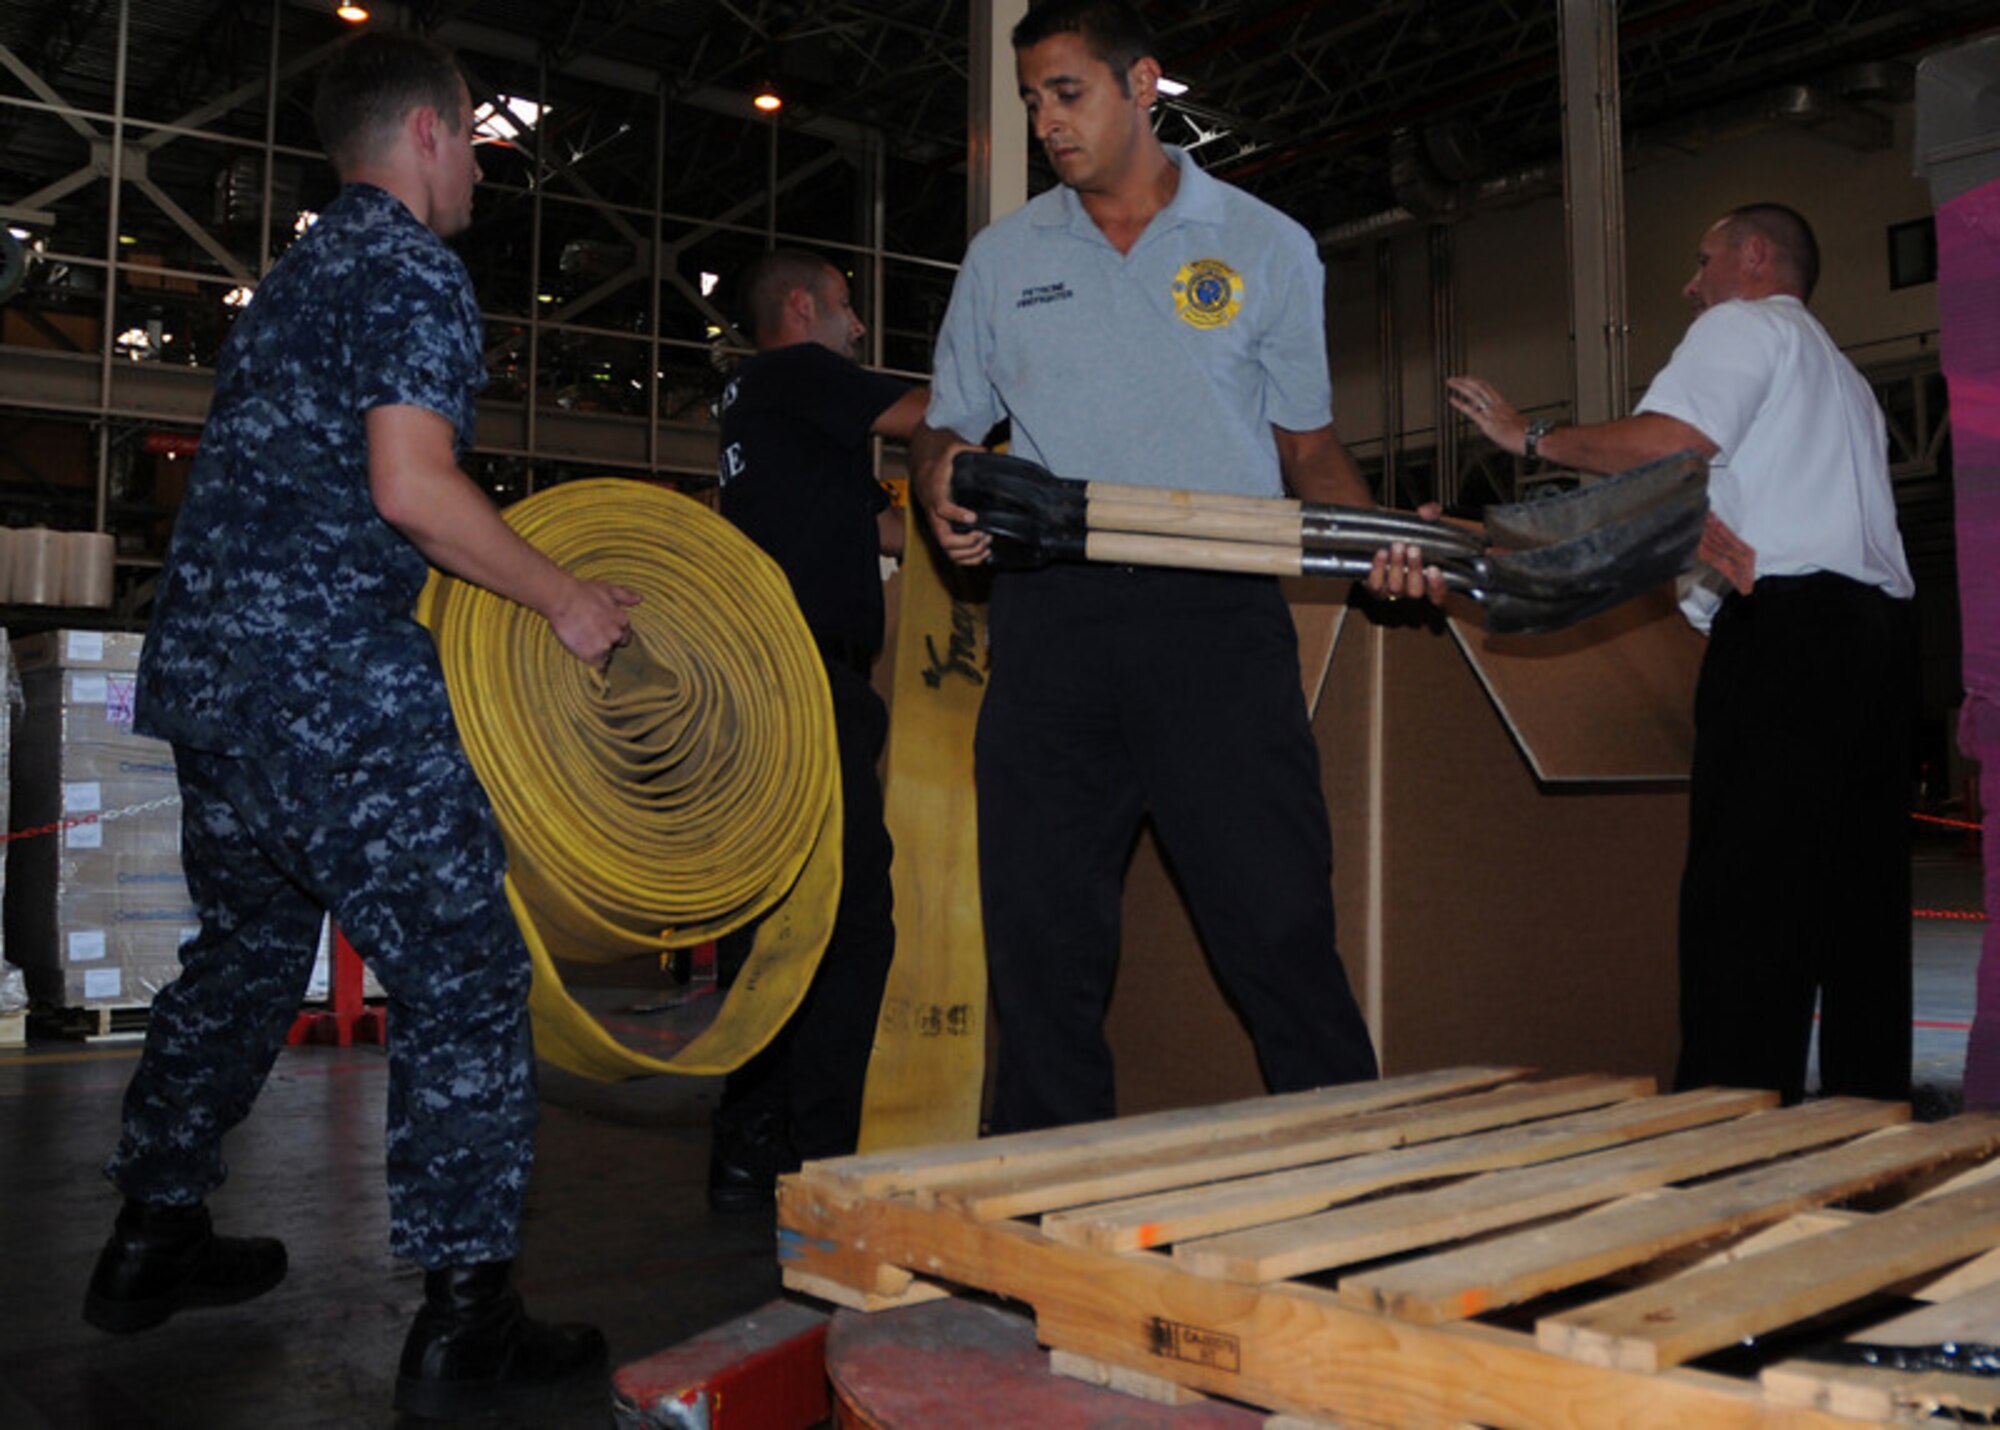 NAPLES, Italy -- Logistic Specialist 2nd Class(SW) Vitali Toptchenko, NSA Naples Lead Fire Inspector Hanz Christian, and Italian national firefighters Maurazio Patrone and Alessio Storto load a pallet of firefighting equipment destined for Russia to help combat wildfires Aug. 11, 2010. The U.S. Navy routinely provides foreign humanitarian assistance in times of crisis, in the same manner as many nations around the world. (U.S. Navy photo by Mass Communication Specialist 3rd Class Kristopher Regan)